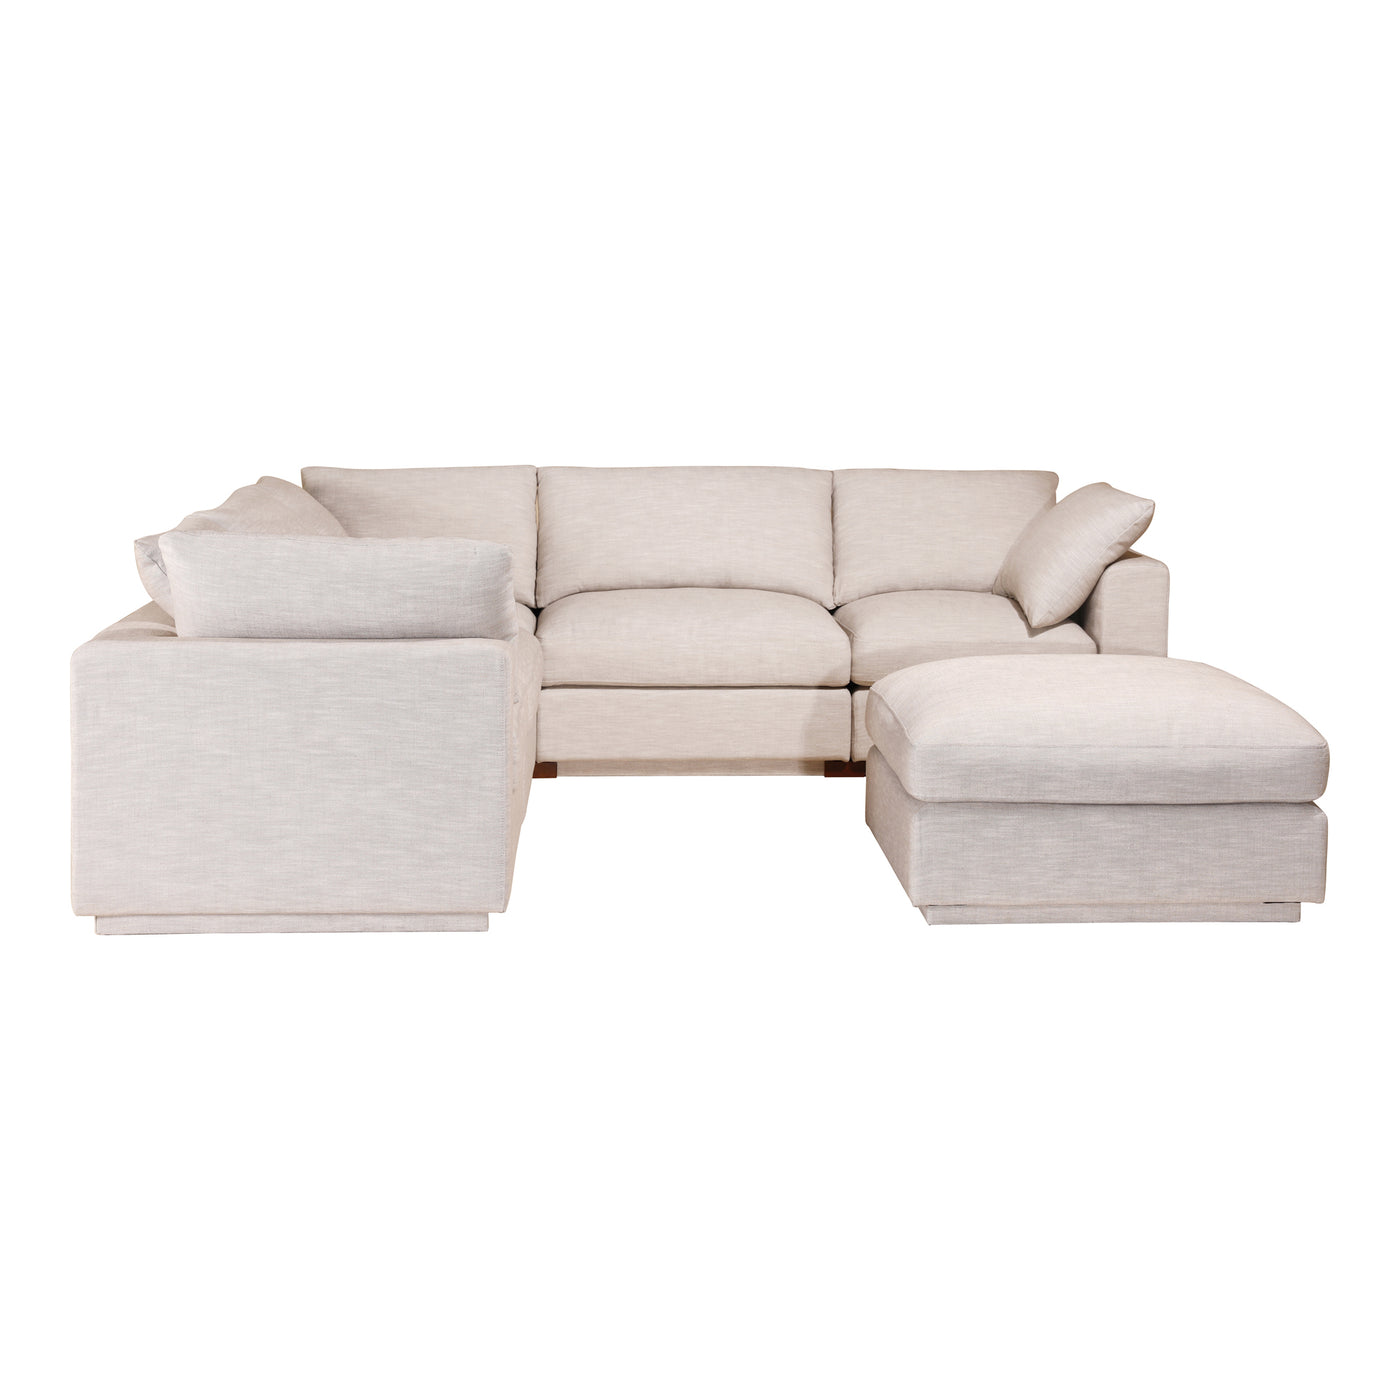 The Justin modular sectional is the ultimate seating area. It showcases two large chaises in its contemporary modern desig...